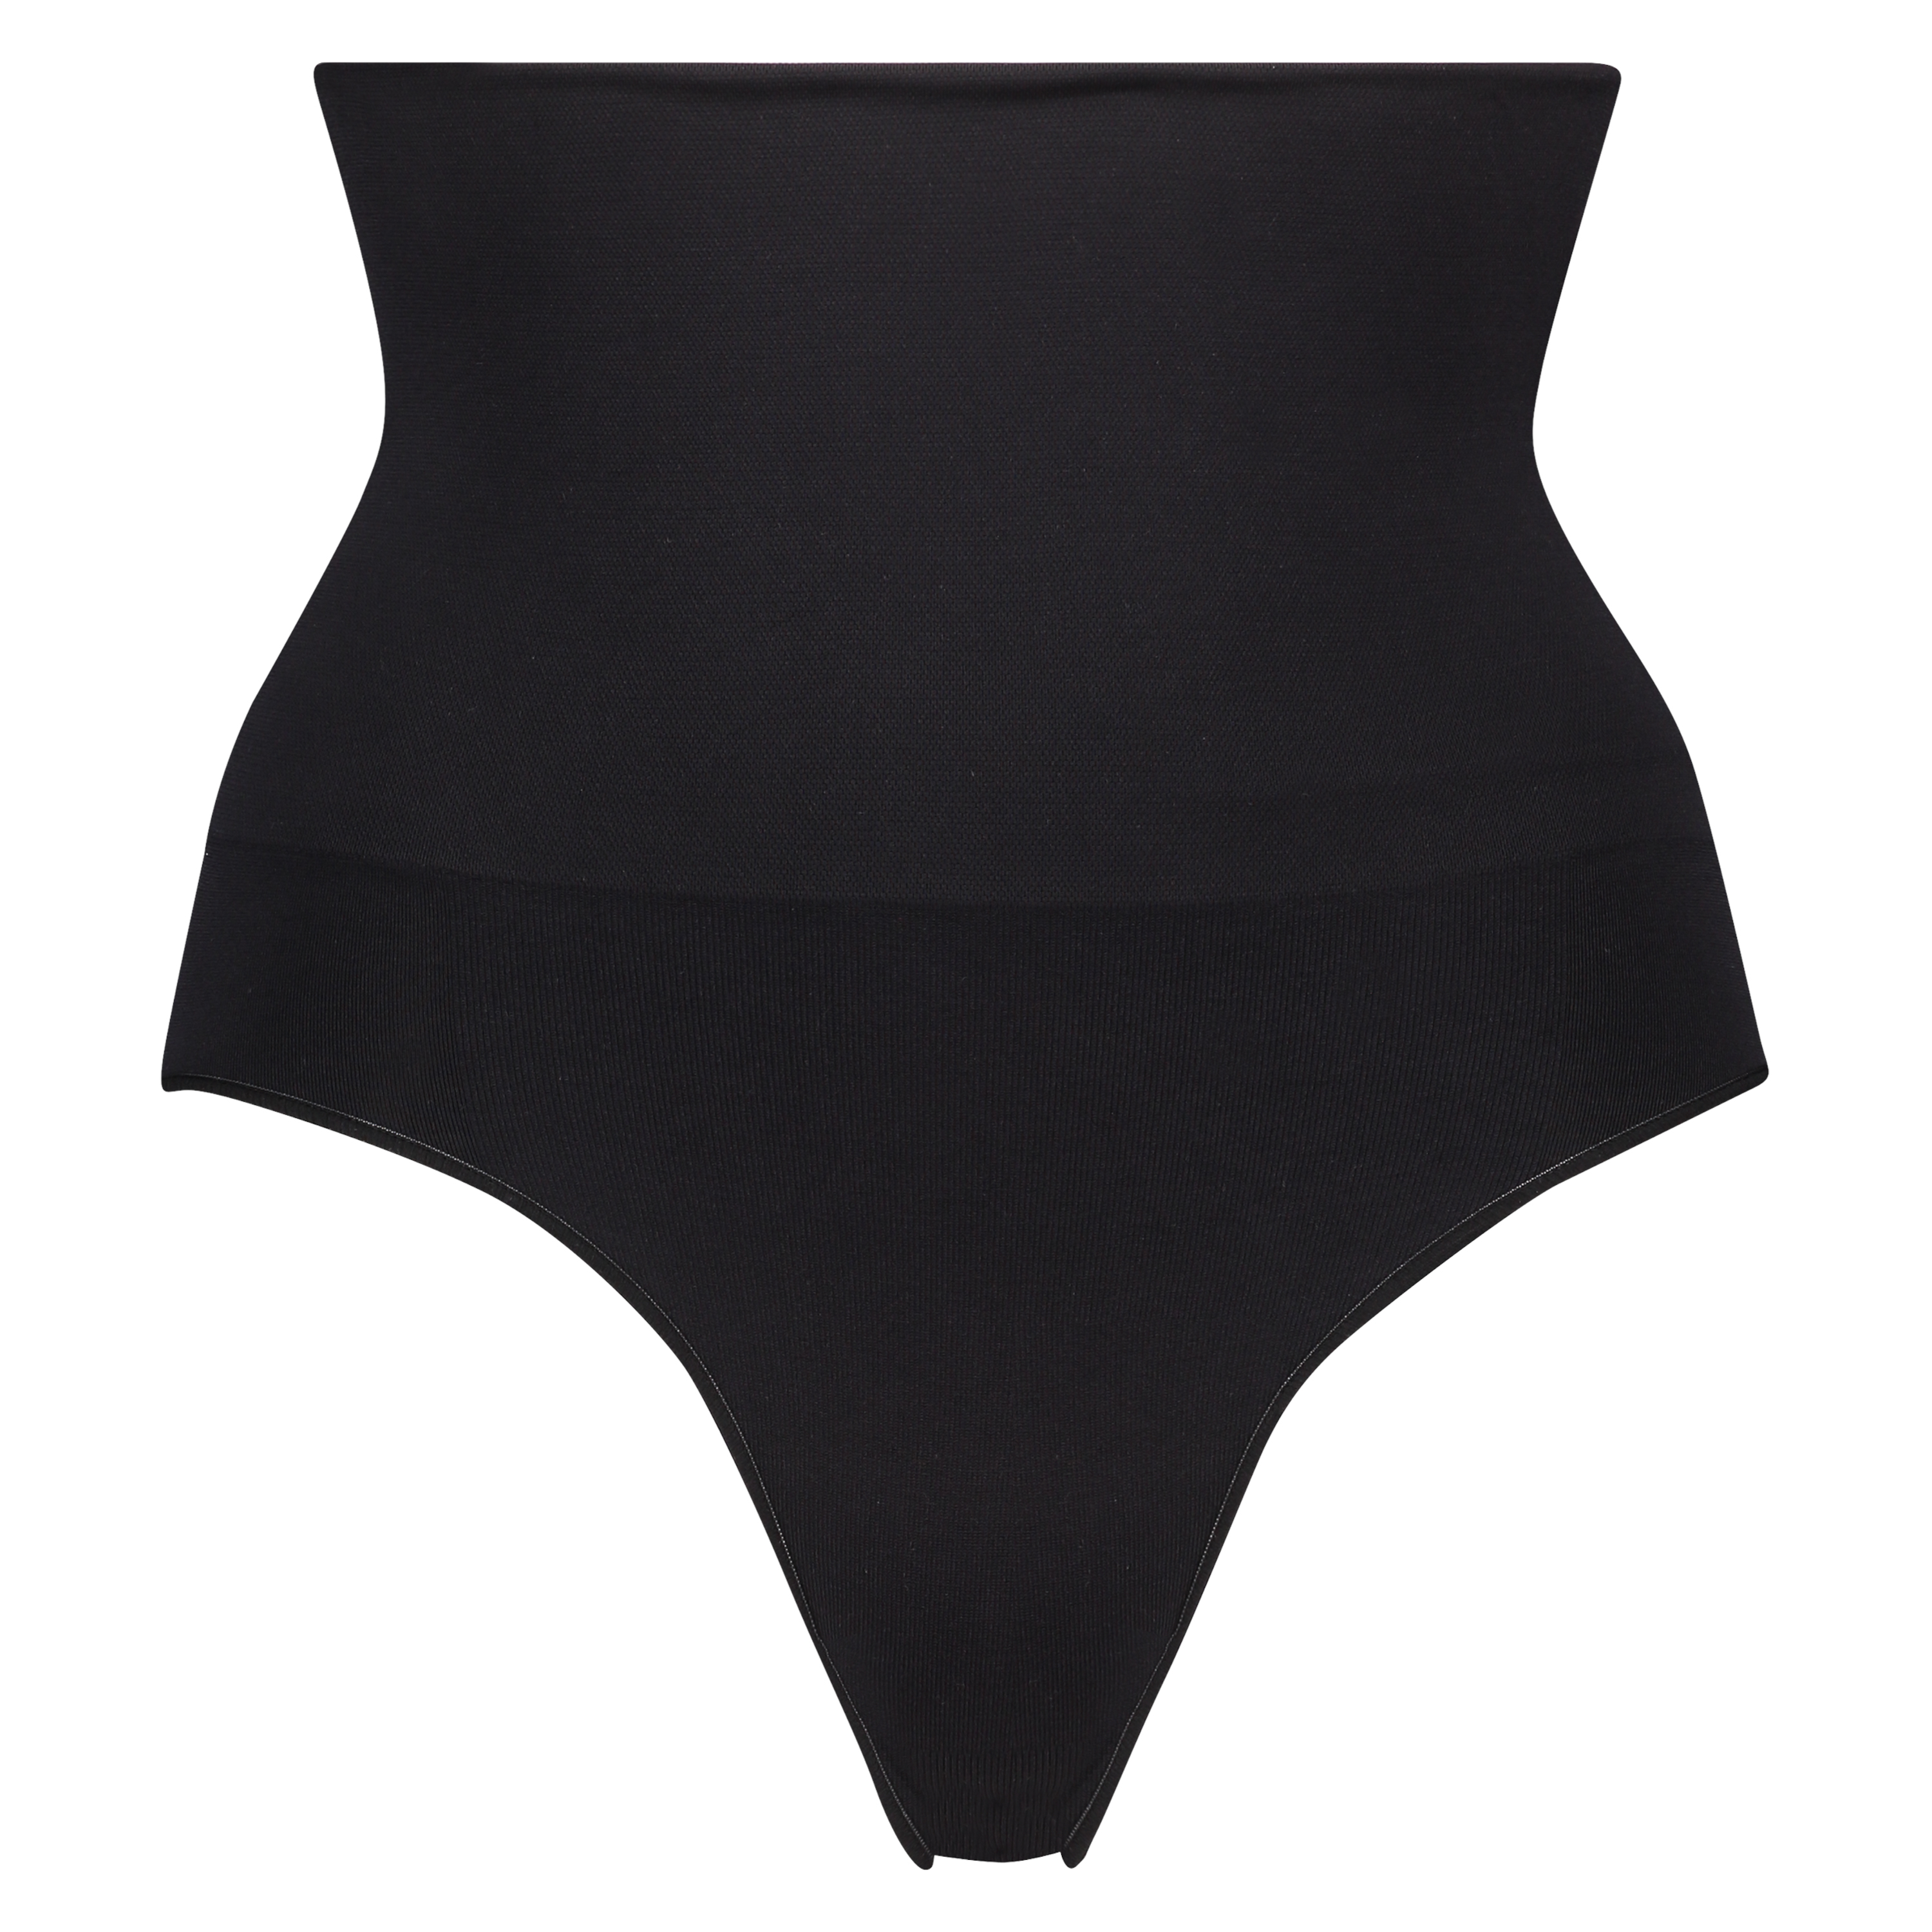 Firming high knickers, Black, main